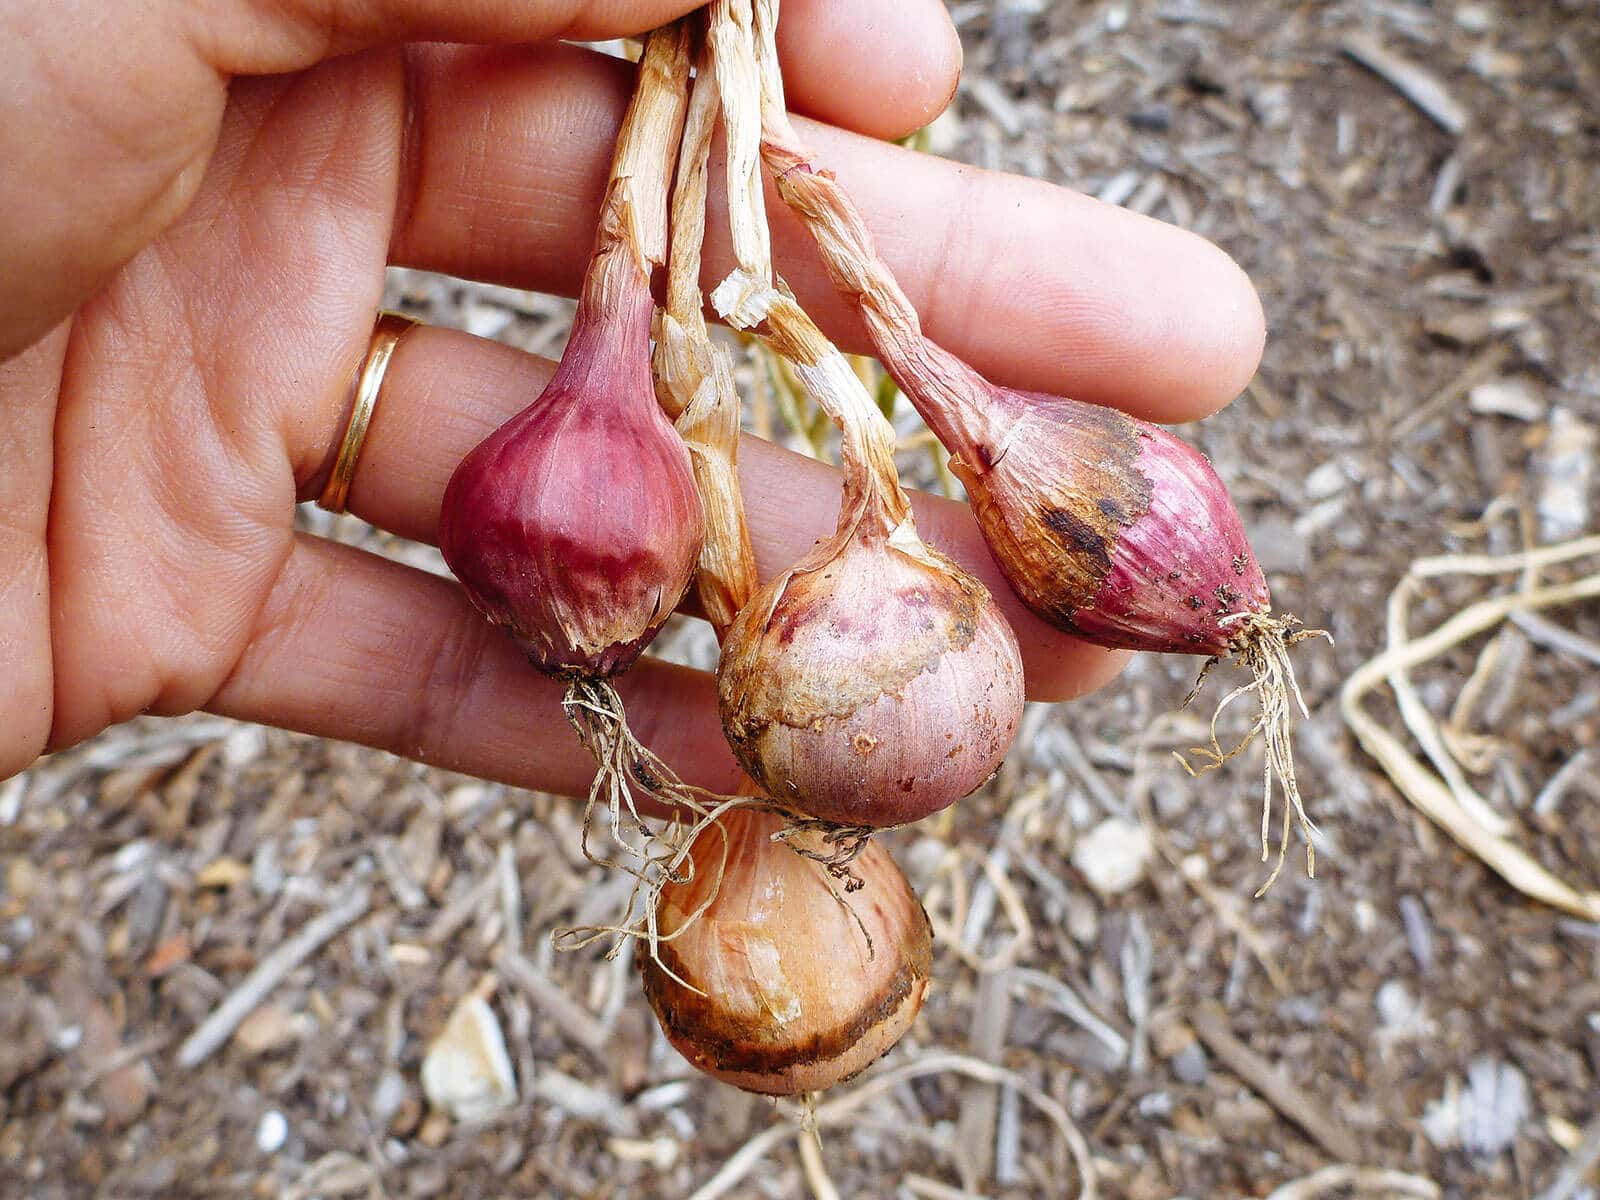 Tiny onions pulled from the ground